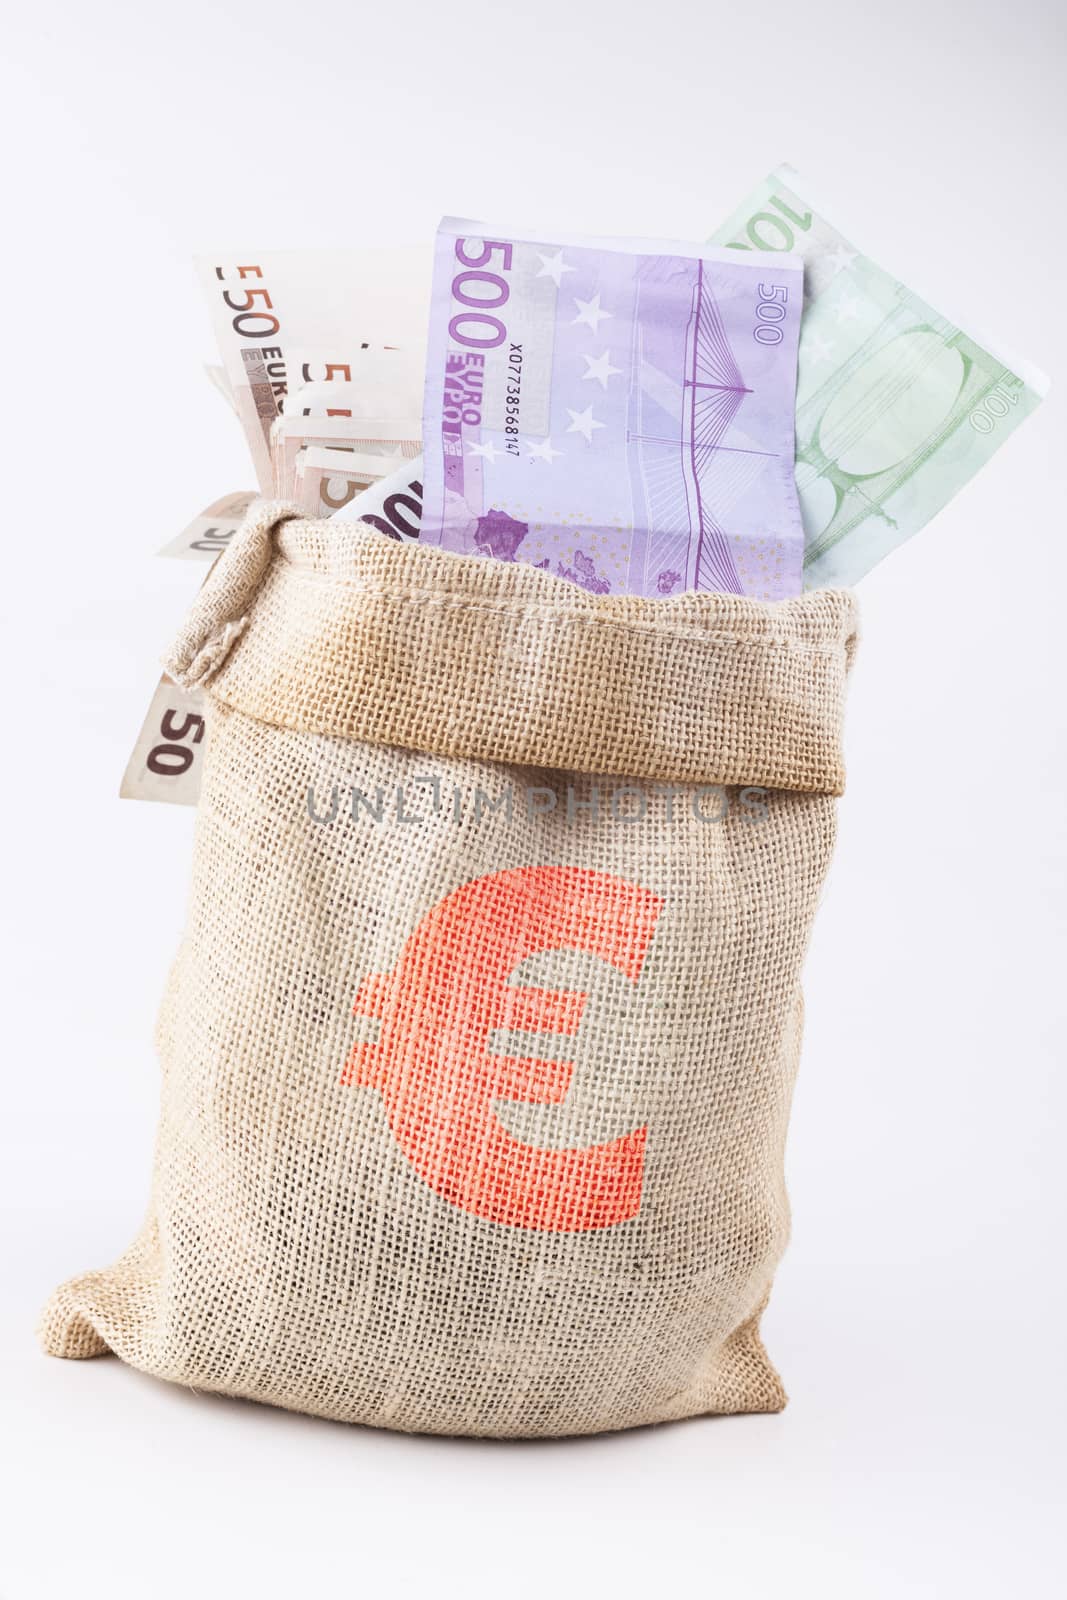 A bag full with euro banknotes with euro sign on the bag isolated on white background